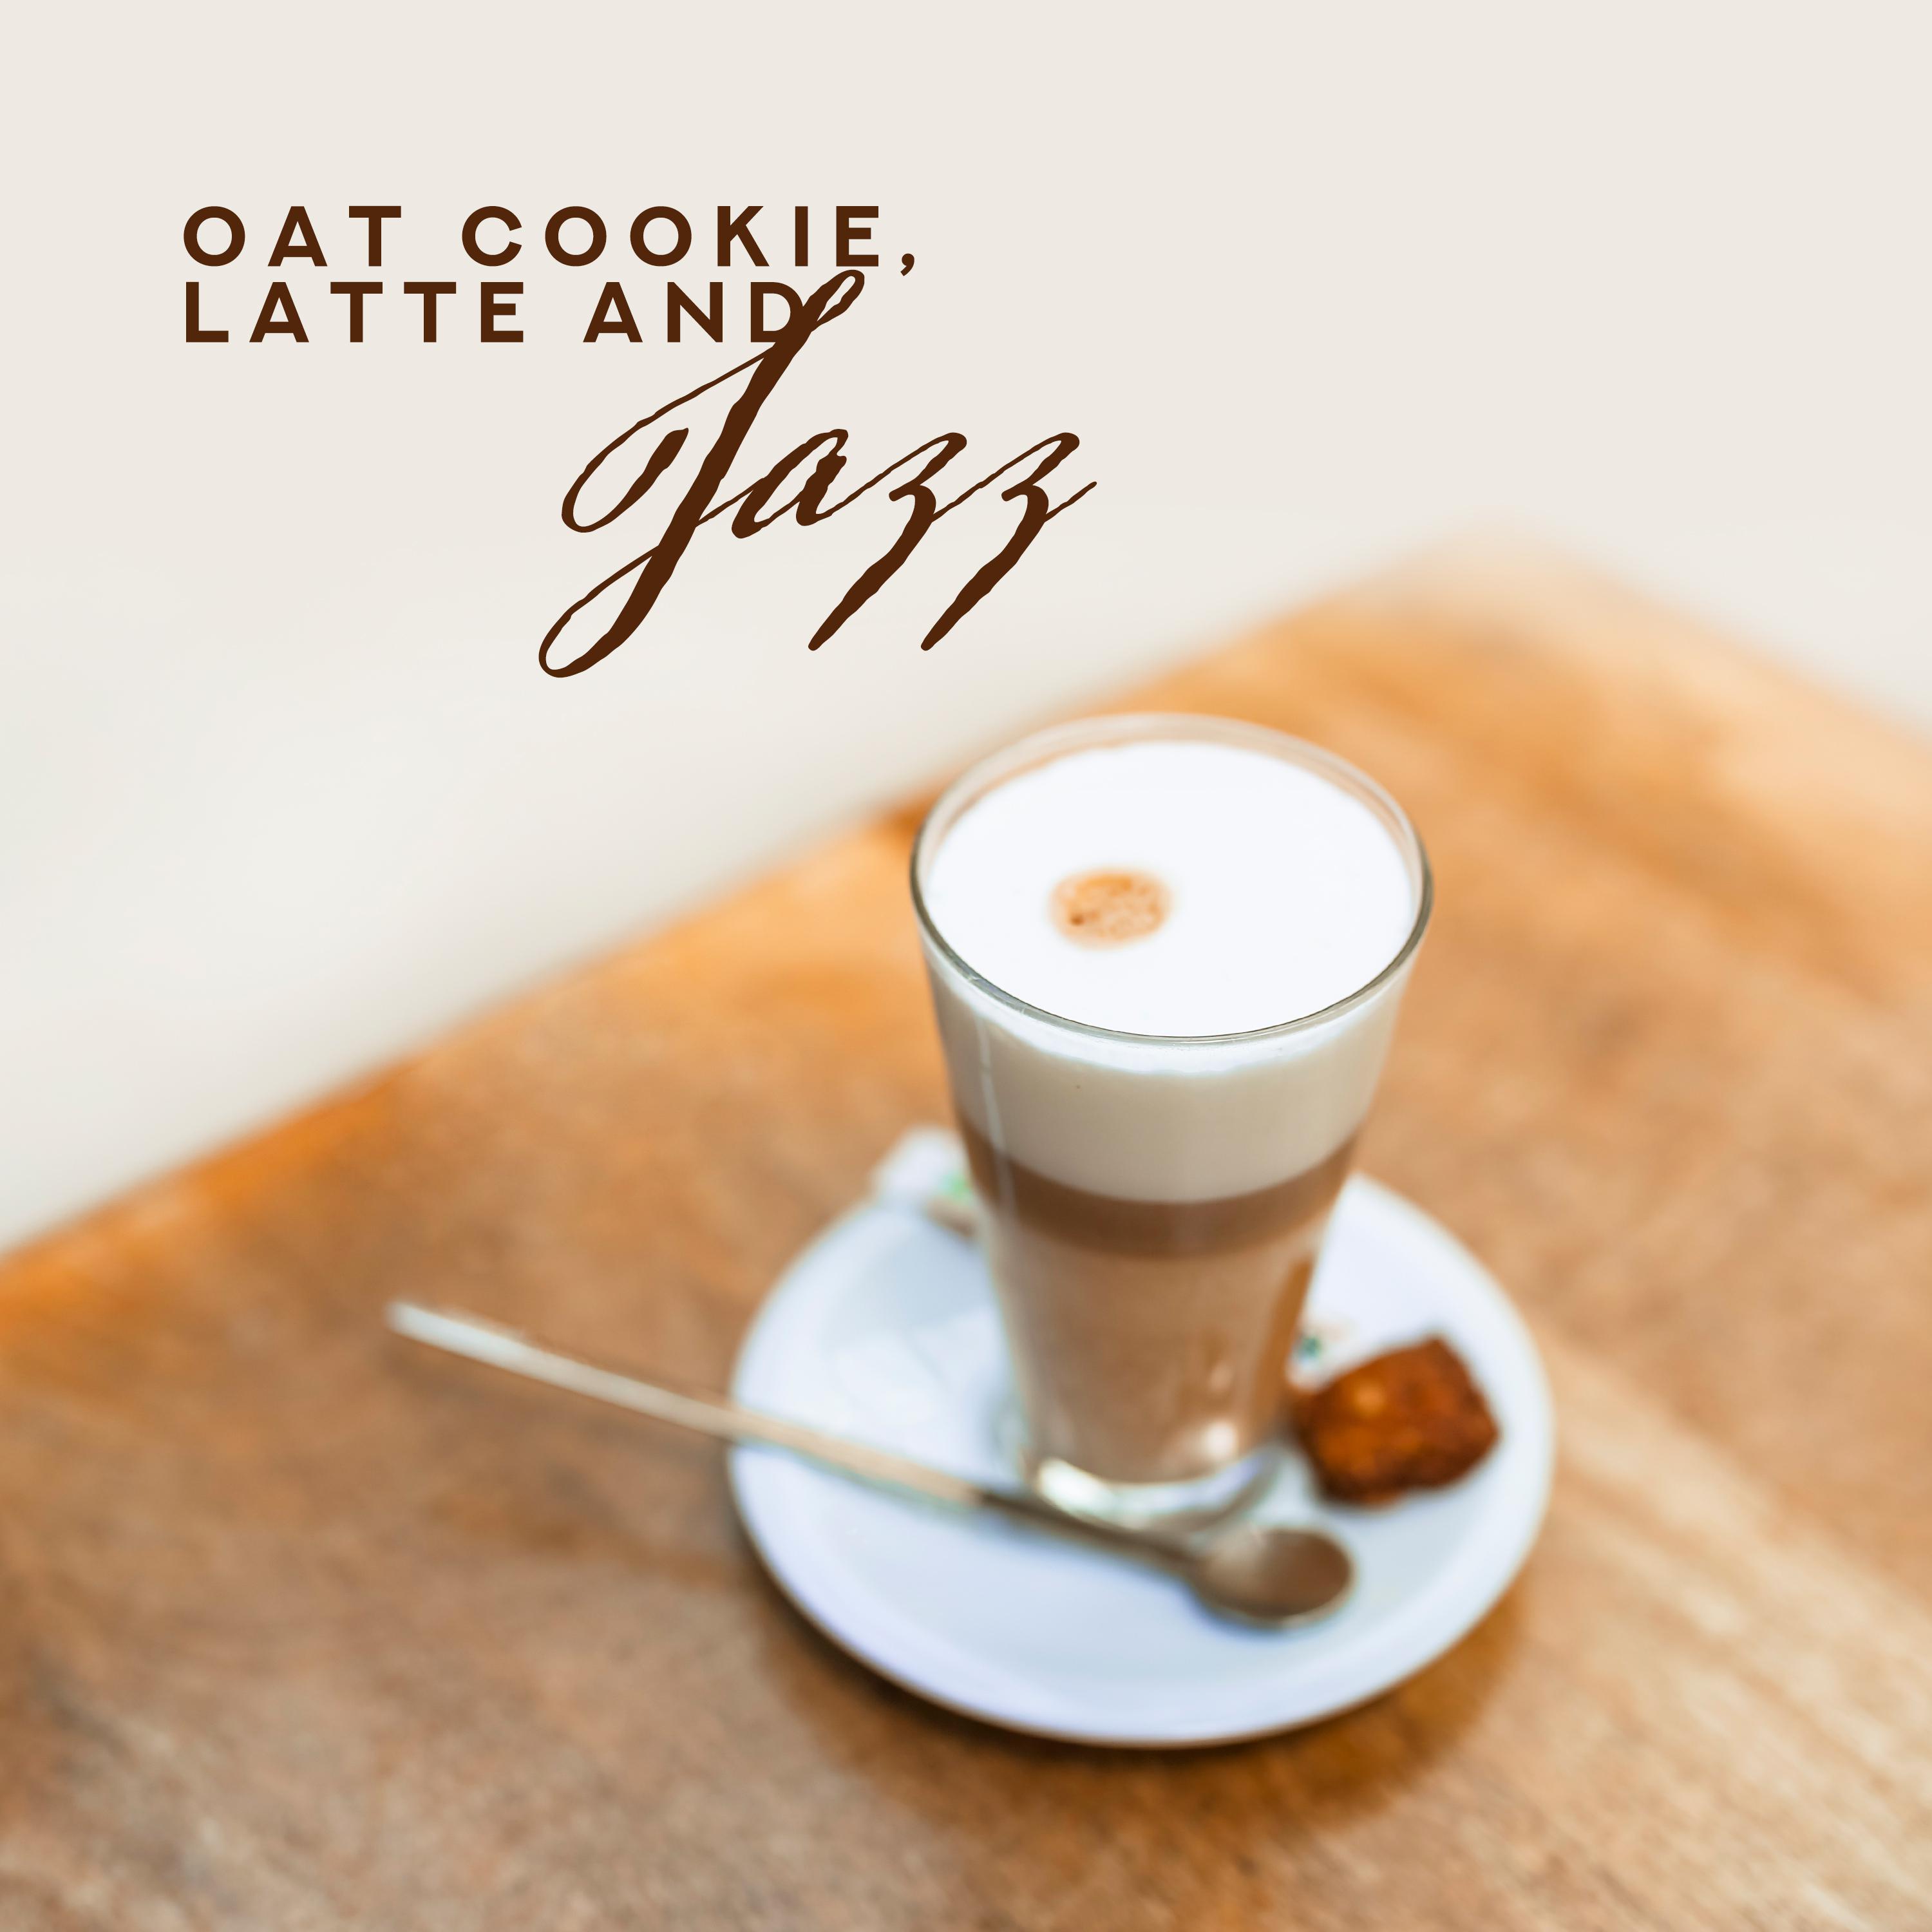 Oat Cookie, Latte and Jazz: 2019 Smooth Instrumental Jazz for Cafe, Perfect Morning with Love in Cafeteria, Songs Created as a Background for Breakfast & Coffee Drinking